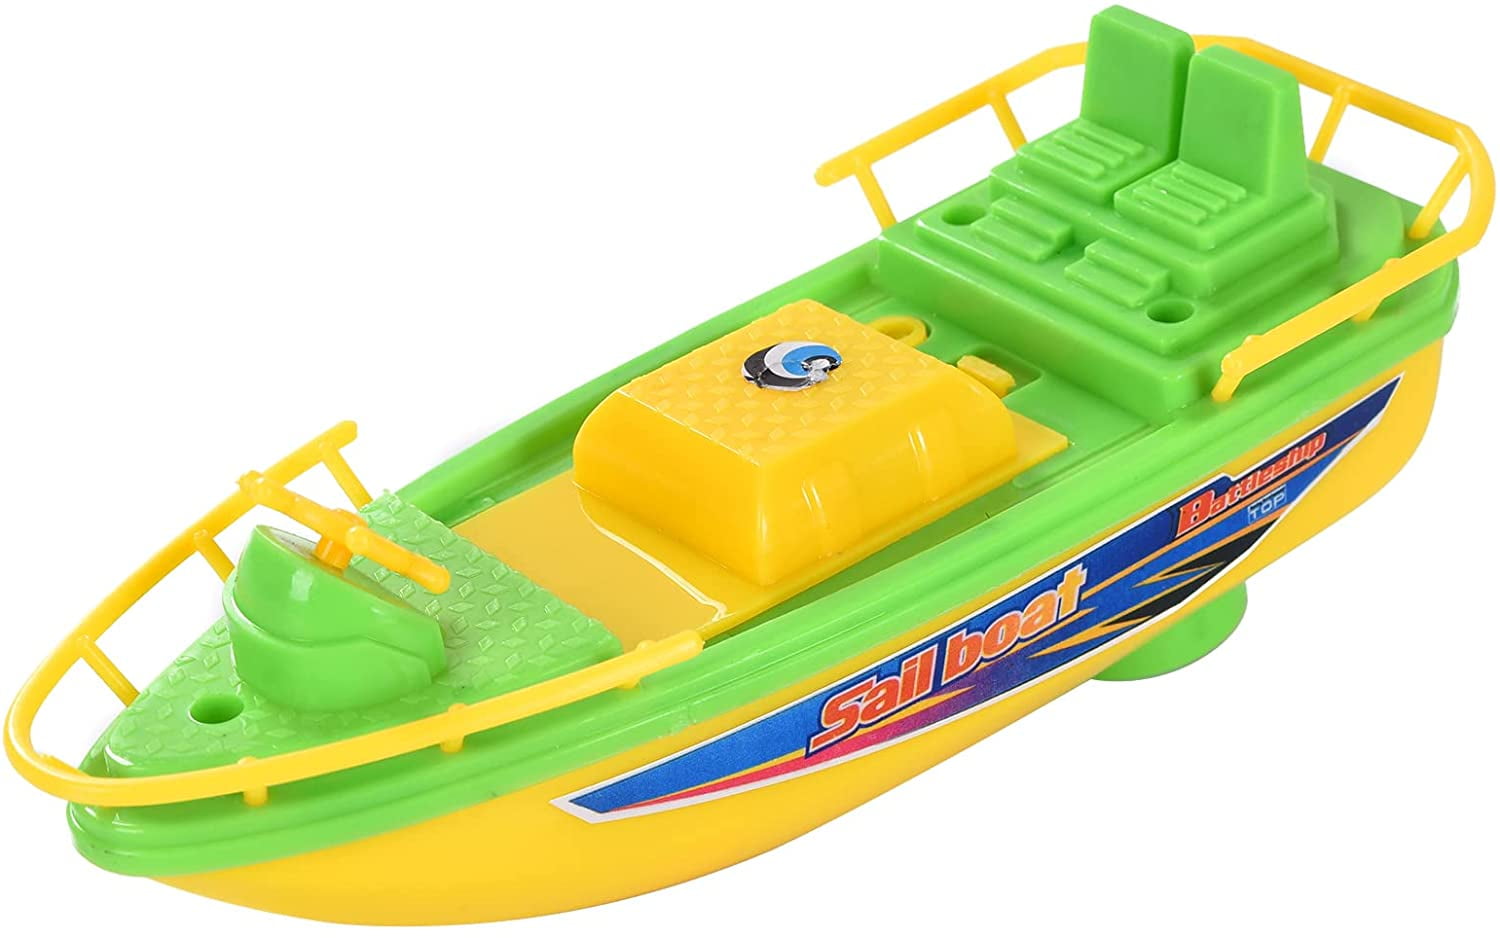 BATTERY OPERATED TOY SPEED BOAT FOR BATH POOL BEACH SUMMER FUN NEW COLOUR GREEN 